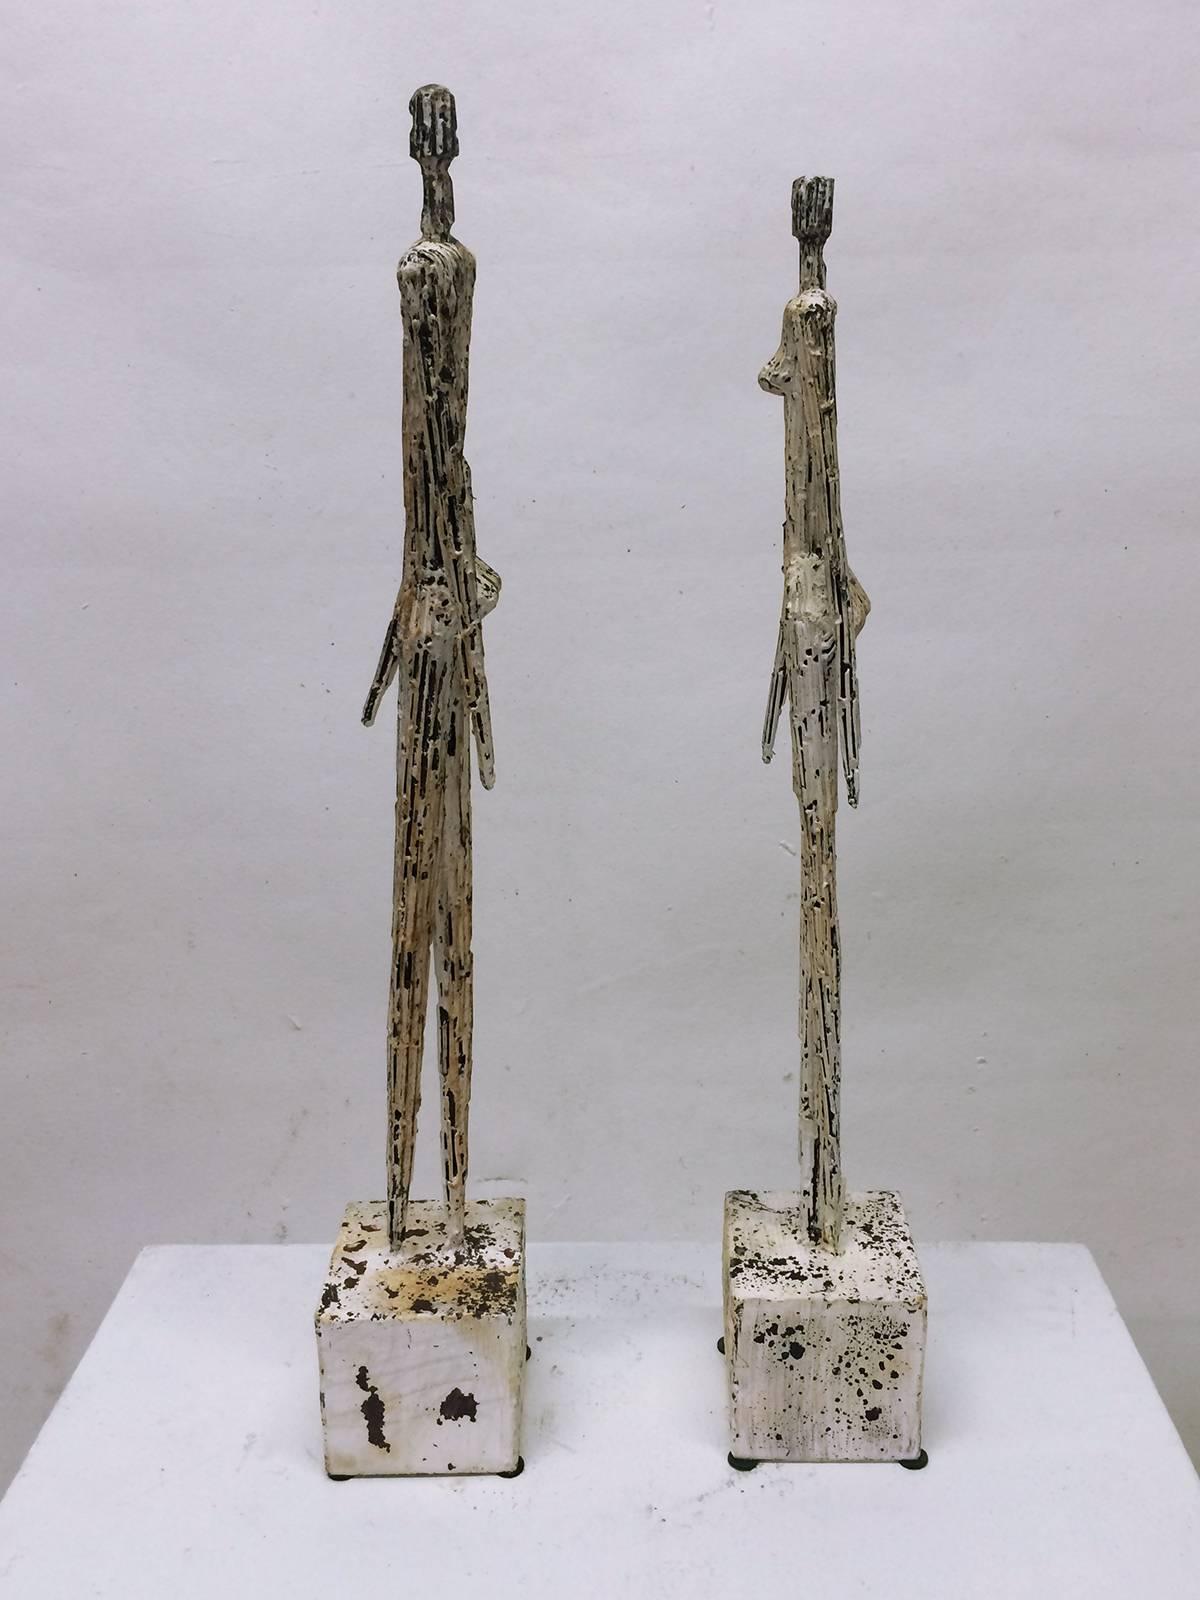 Two  metal figures, one male and one female,  in a style similar to that of Alberto Giacometti.  The figurative sculptures feature a distress look .